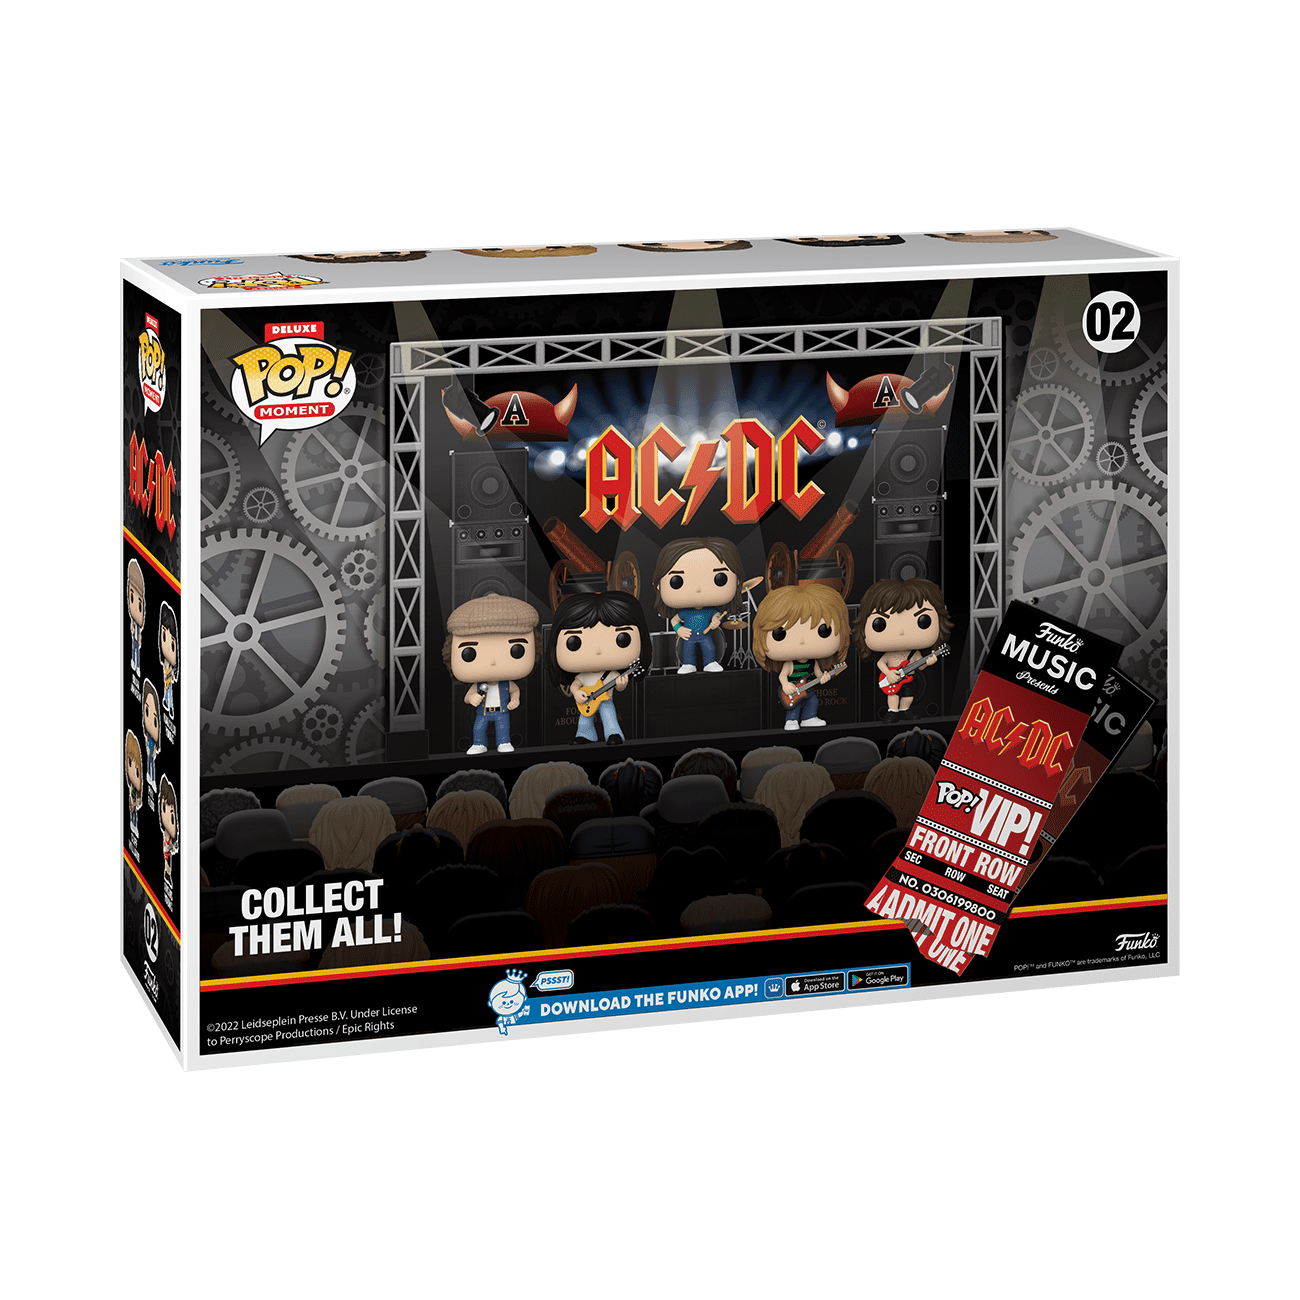 Funko Pop! Moment Deluxe: Metallica Master of Puppets Tour (1986